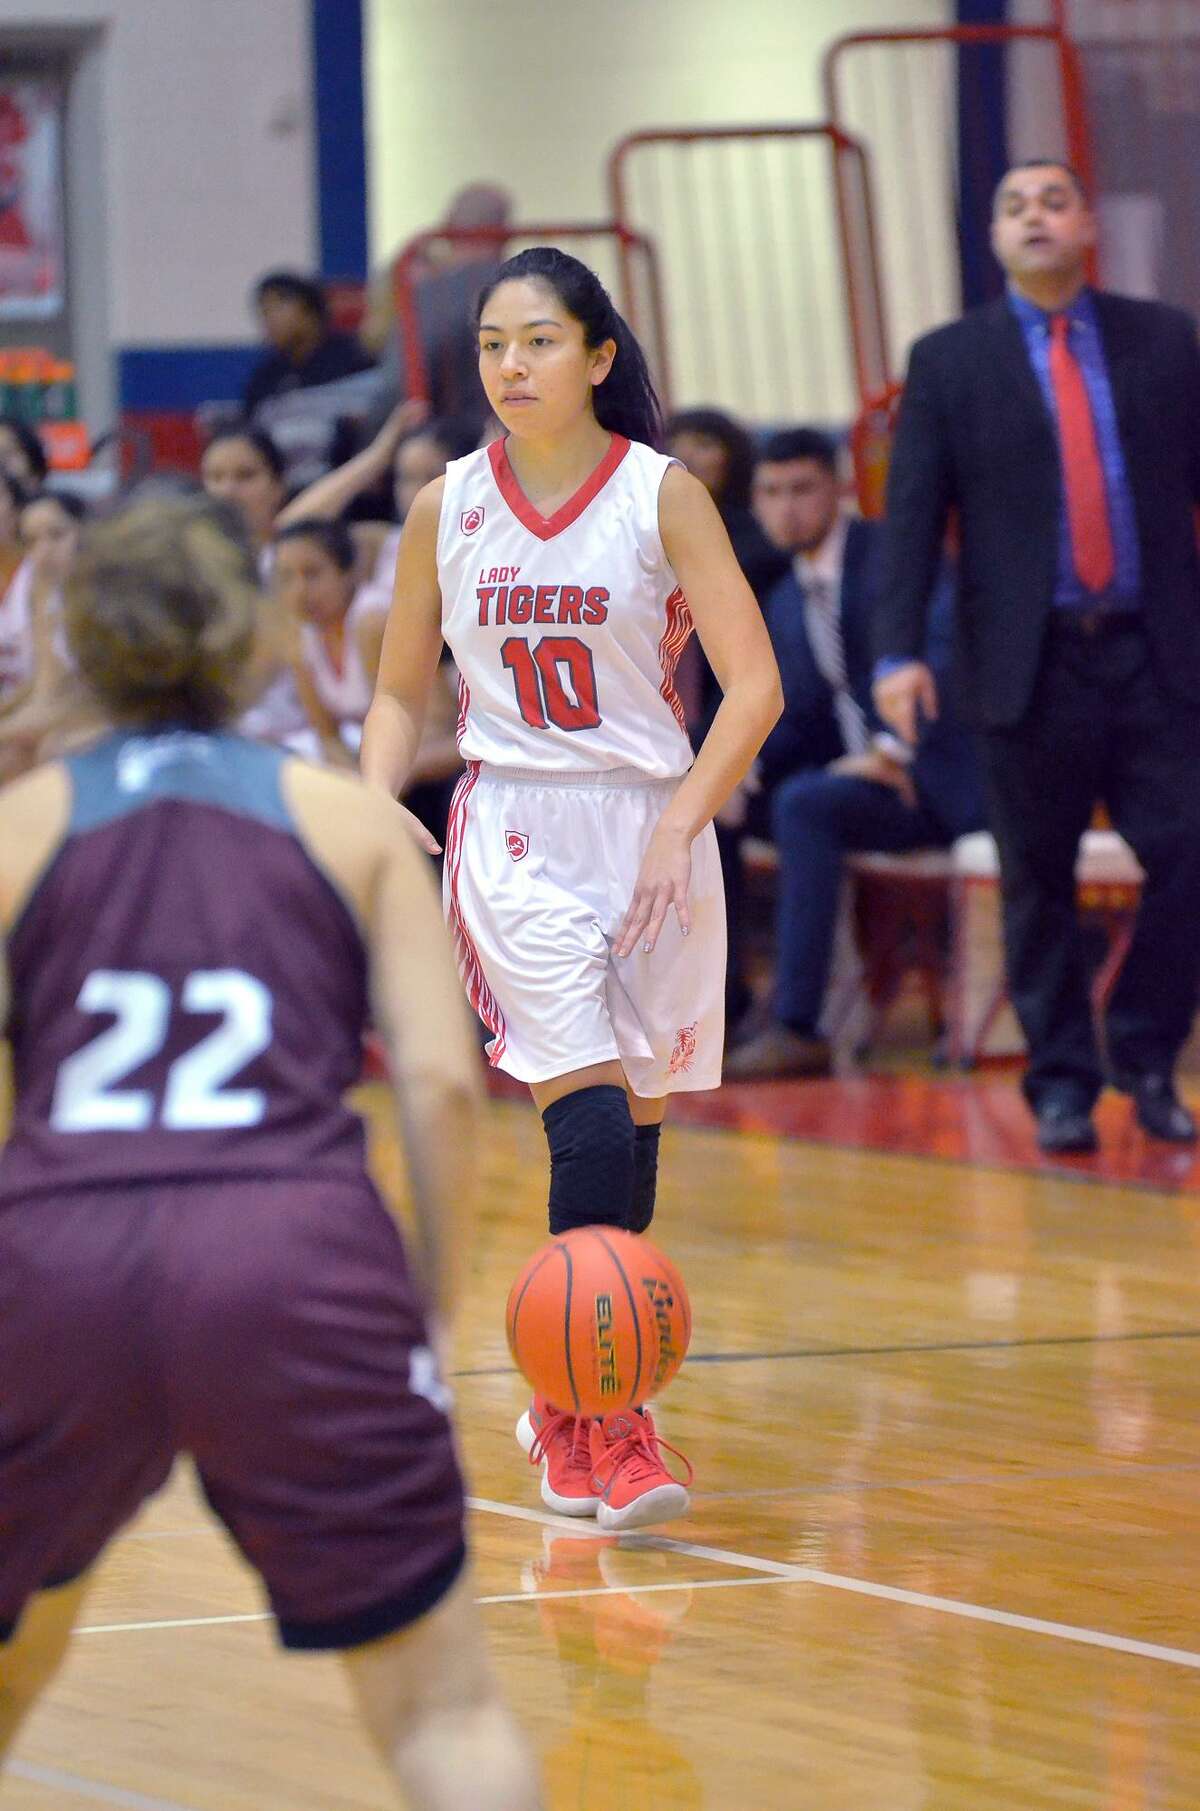 Samantha Gonzalez and Martin are now 2-2 this season in District 29-5A after Friday’s comeback victory.